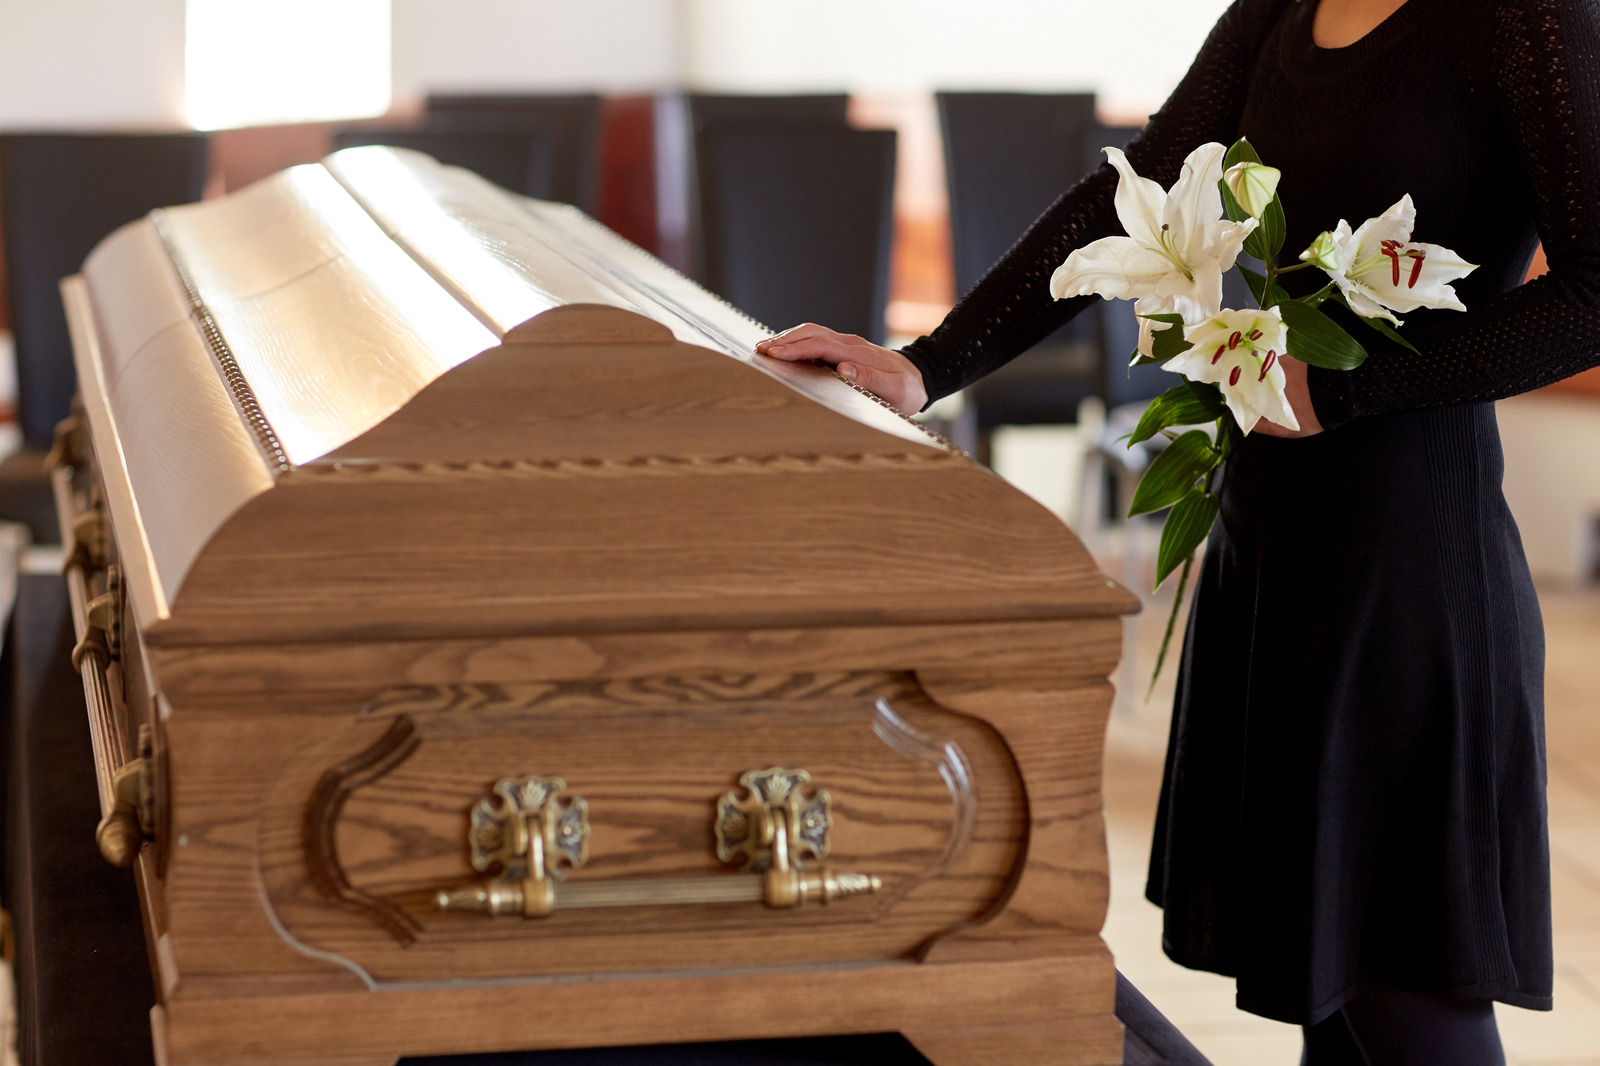 screen 2x 3 - Funeral etiquette: the dos and don’ts of attending a funeral